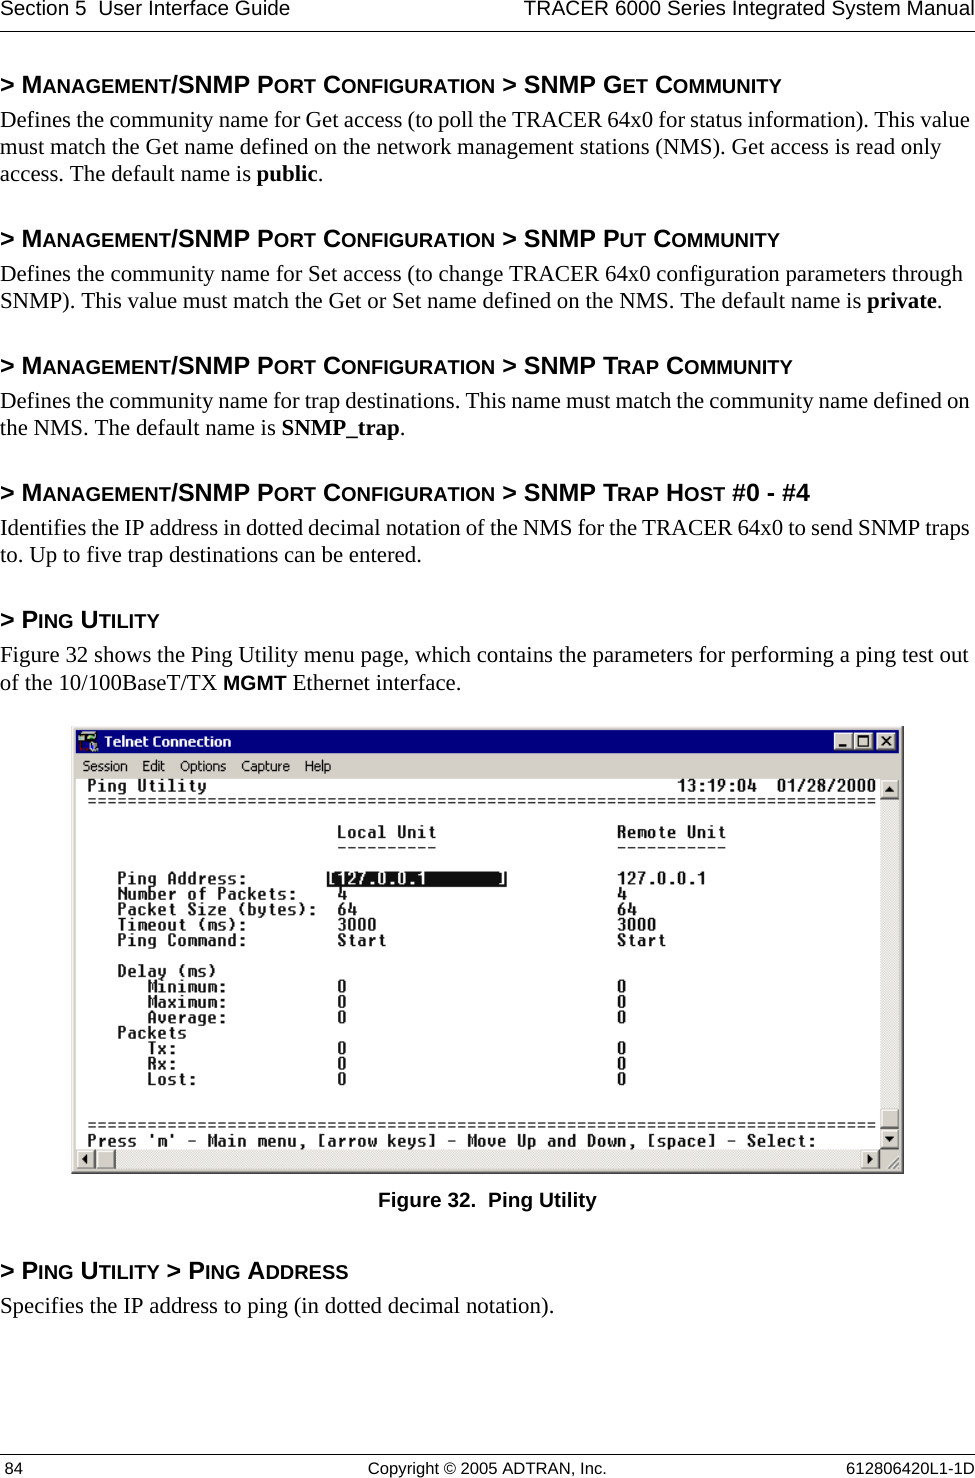 Section 5  User Interface Guide TRACER 6000 Series Integrated System Manual 84 Copyright © 2005 ADTRAN, Inc. 612806420L1-1D&gt; MANAGEMENT/SNMP PORT CONFIGURATION &gt; SNMP GET COMMUNITYDefines the community name for Get access (to poll the TRACER 64x0 for status information). This value must match the Get name defined on the network management stations (NMS). Get access is read only access. The default name is public.&gt; MANAGEMENT/SNMP PORT CONFIGURATION &gt; SNMP PUT COMMUNITYDefines the community name for Set access (to change TRACER 64x0 configuration parameters through SNMP). This value must match the Get or Set name defined on the NMS. The default name is private.&gt; MANAGEMENT/SNMP PORT CONFIGURATION &gt; SNMP TRAP COMMUNITYDefines the community name for trap destinations. This name must match the community name defined on the NMS. The default name is SNMP_trap.&gt; MANAGEMENT/SNMP PORT CONFIGURATION &gt; SNMP TRAP HOST #0 - #4Identifies the IP address in dotted decimal notation of the NMS for the TRACER 64x0 to send SNMP traps to. Up to five trap destinations can be entered.&gt; PING UTILITYFigure 32 shows the Ping Utility menu page, which contains the parameters for performing a ping test out of the 10/100BaseT/TX MGMT Ethernet interface. Figure 32.  Ping Utility&gt; PING UTILITY &gt; PING ADDRESSSpecifies the IP address to ping (in dotted decimal notation).